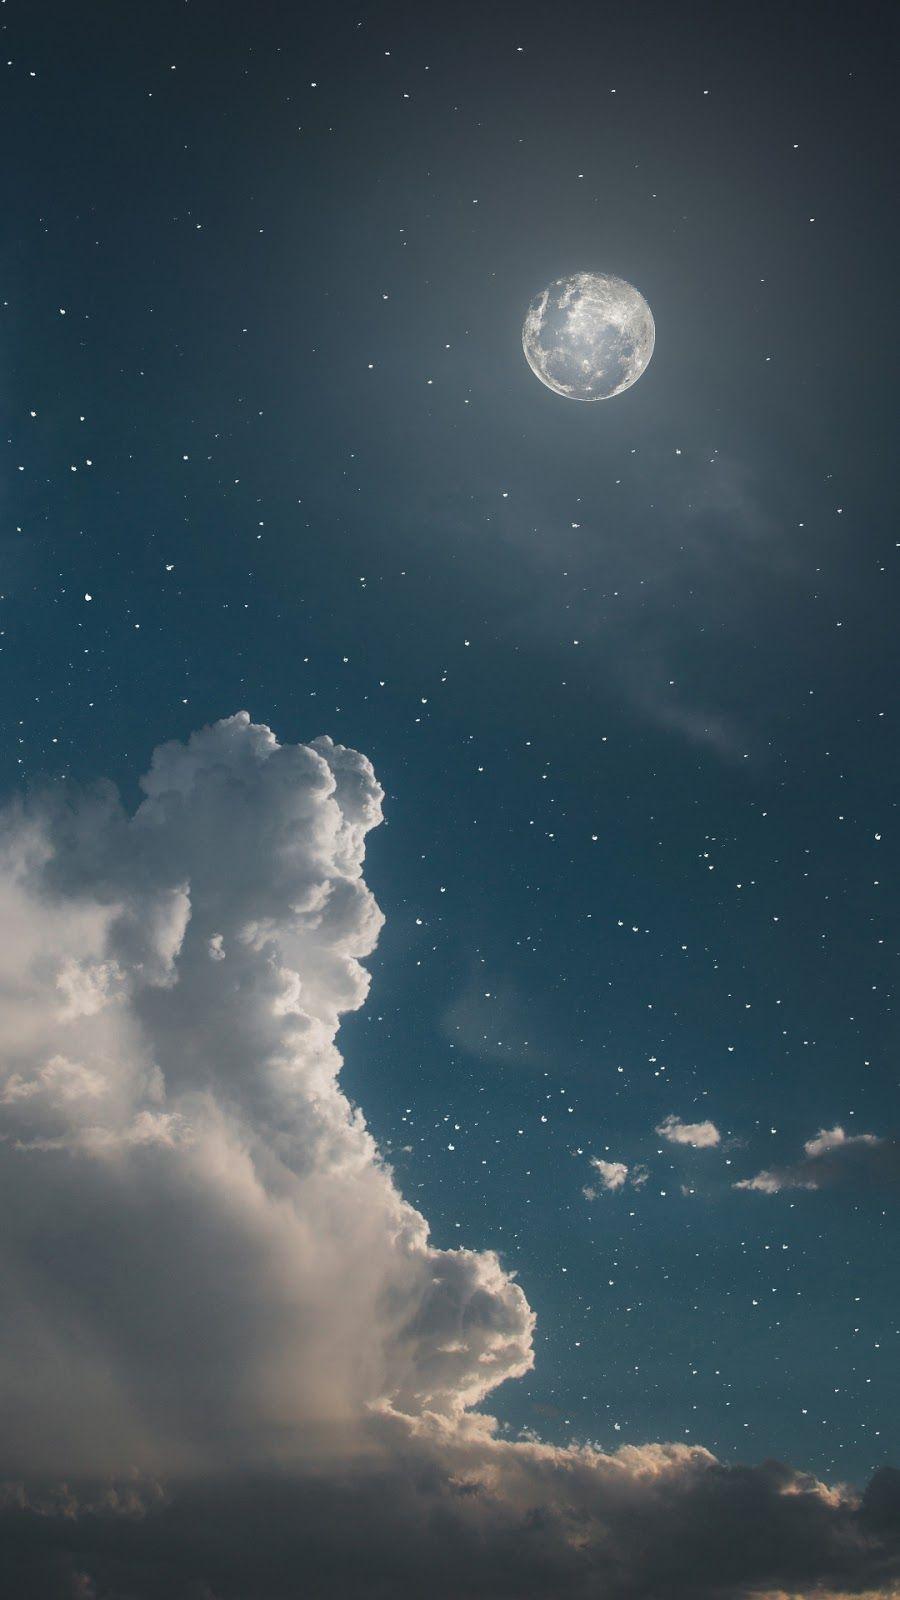 Night Sky Aesthetic Wallpapers Wallpaper Cave